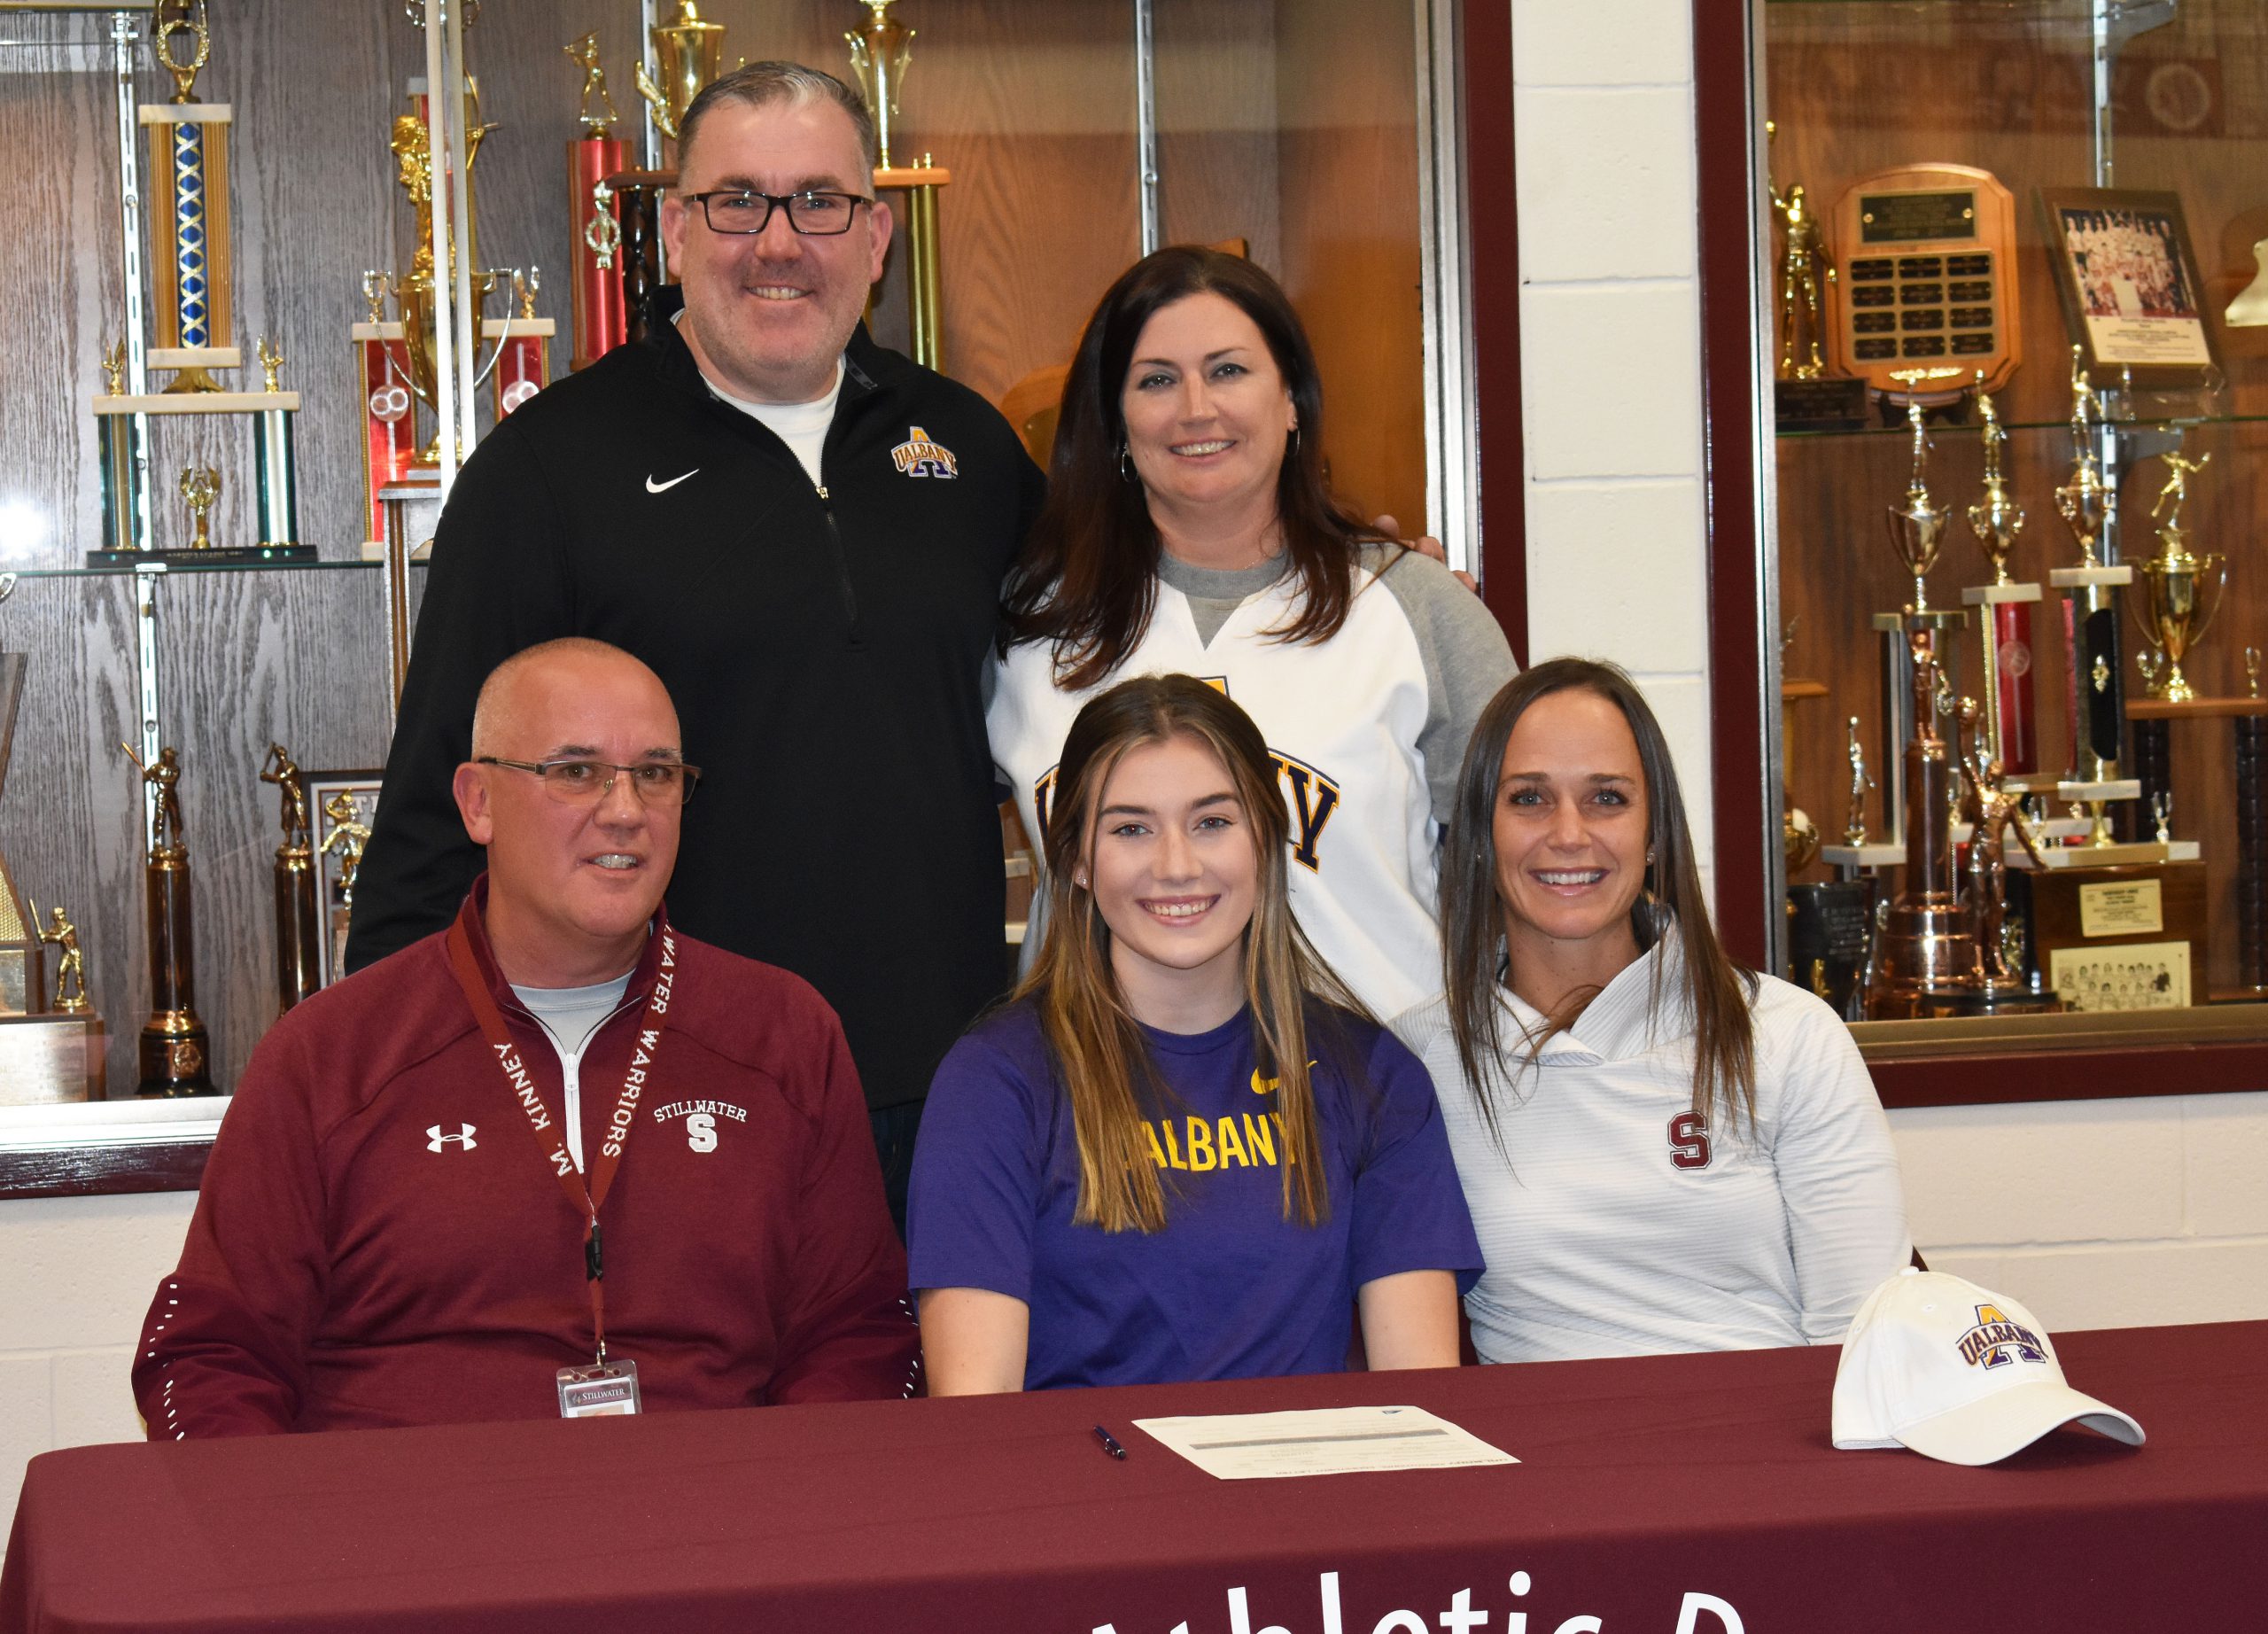 Brooke sitting at a table with parents, coach and athletic director